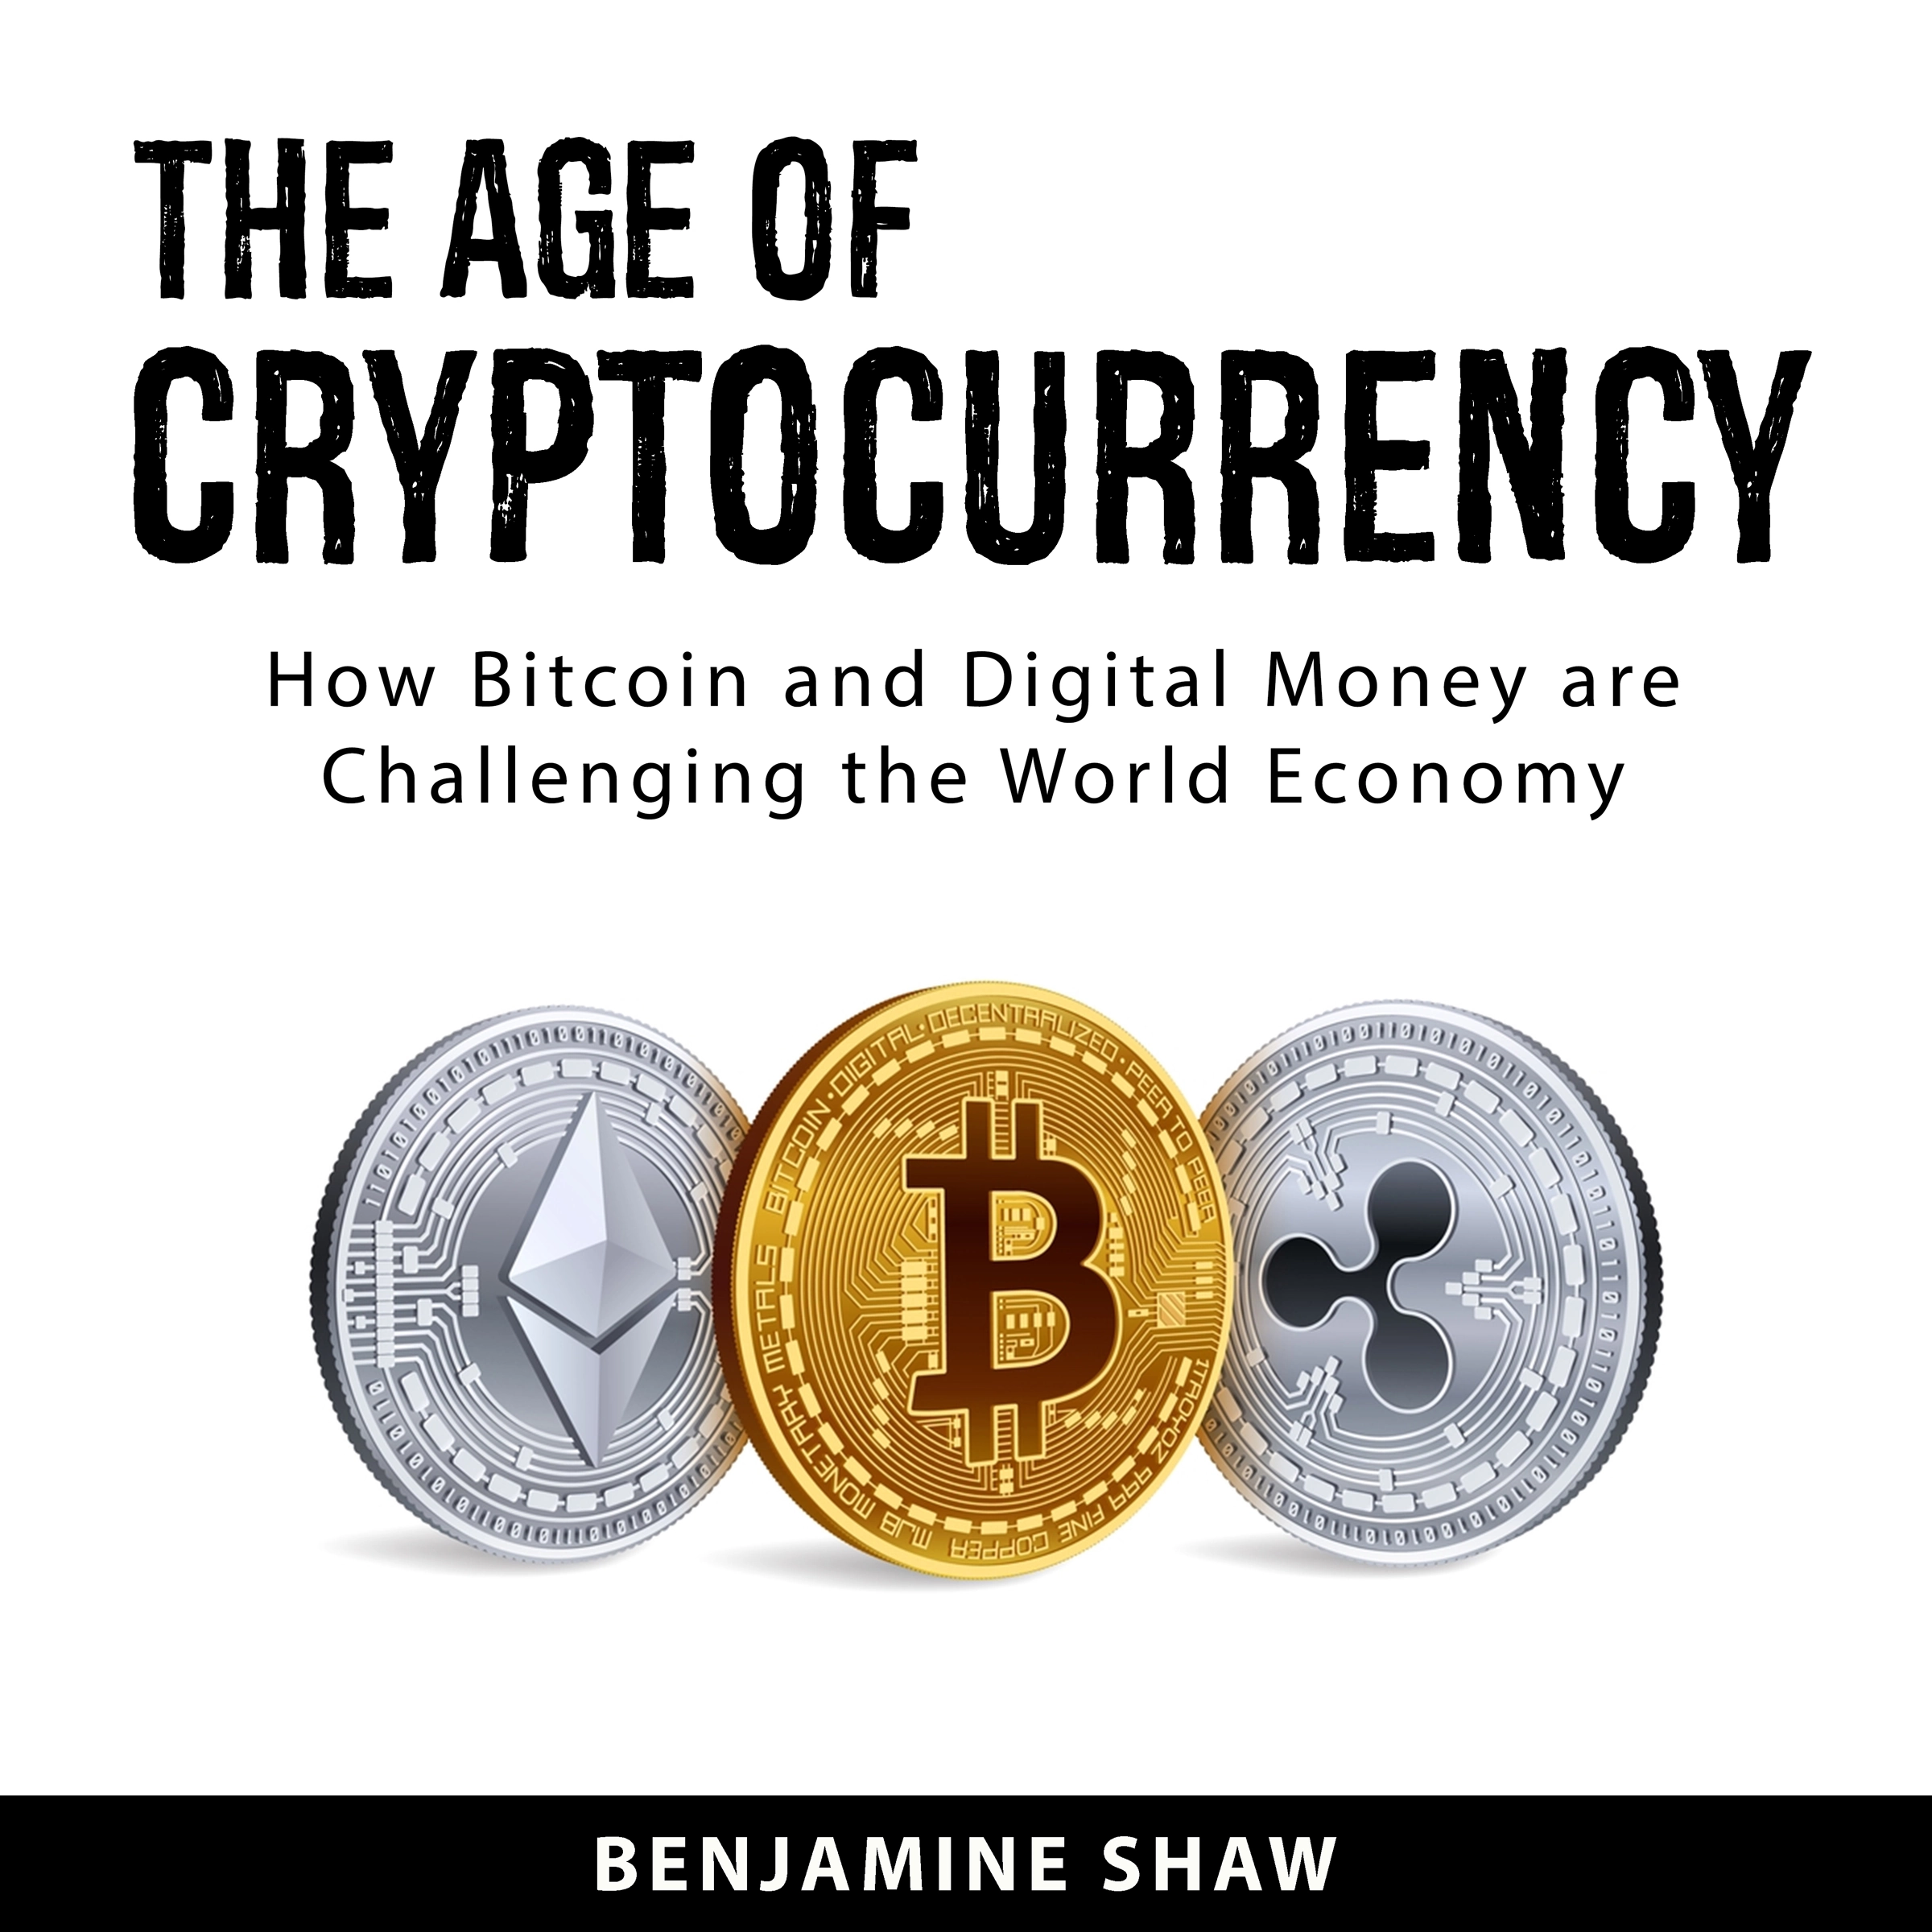 The Age of Cryptocurrency Audiobook by Benjamine Shaw